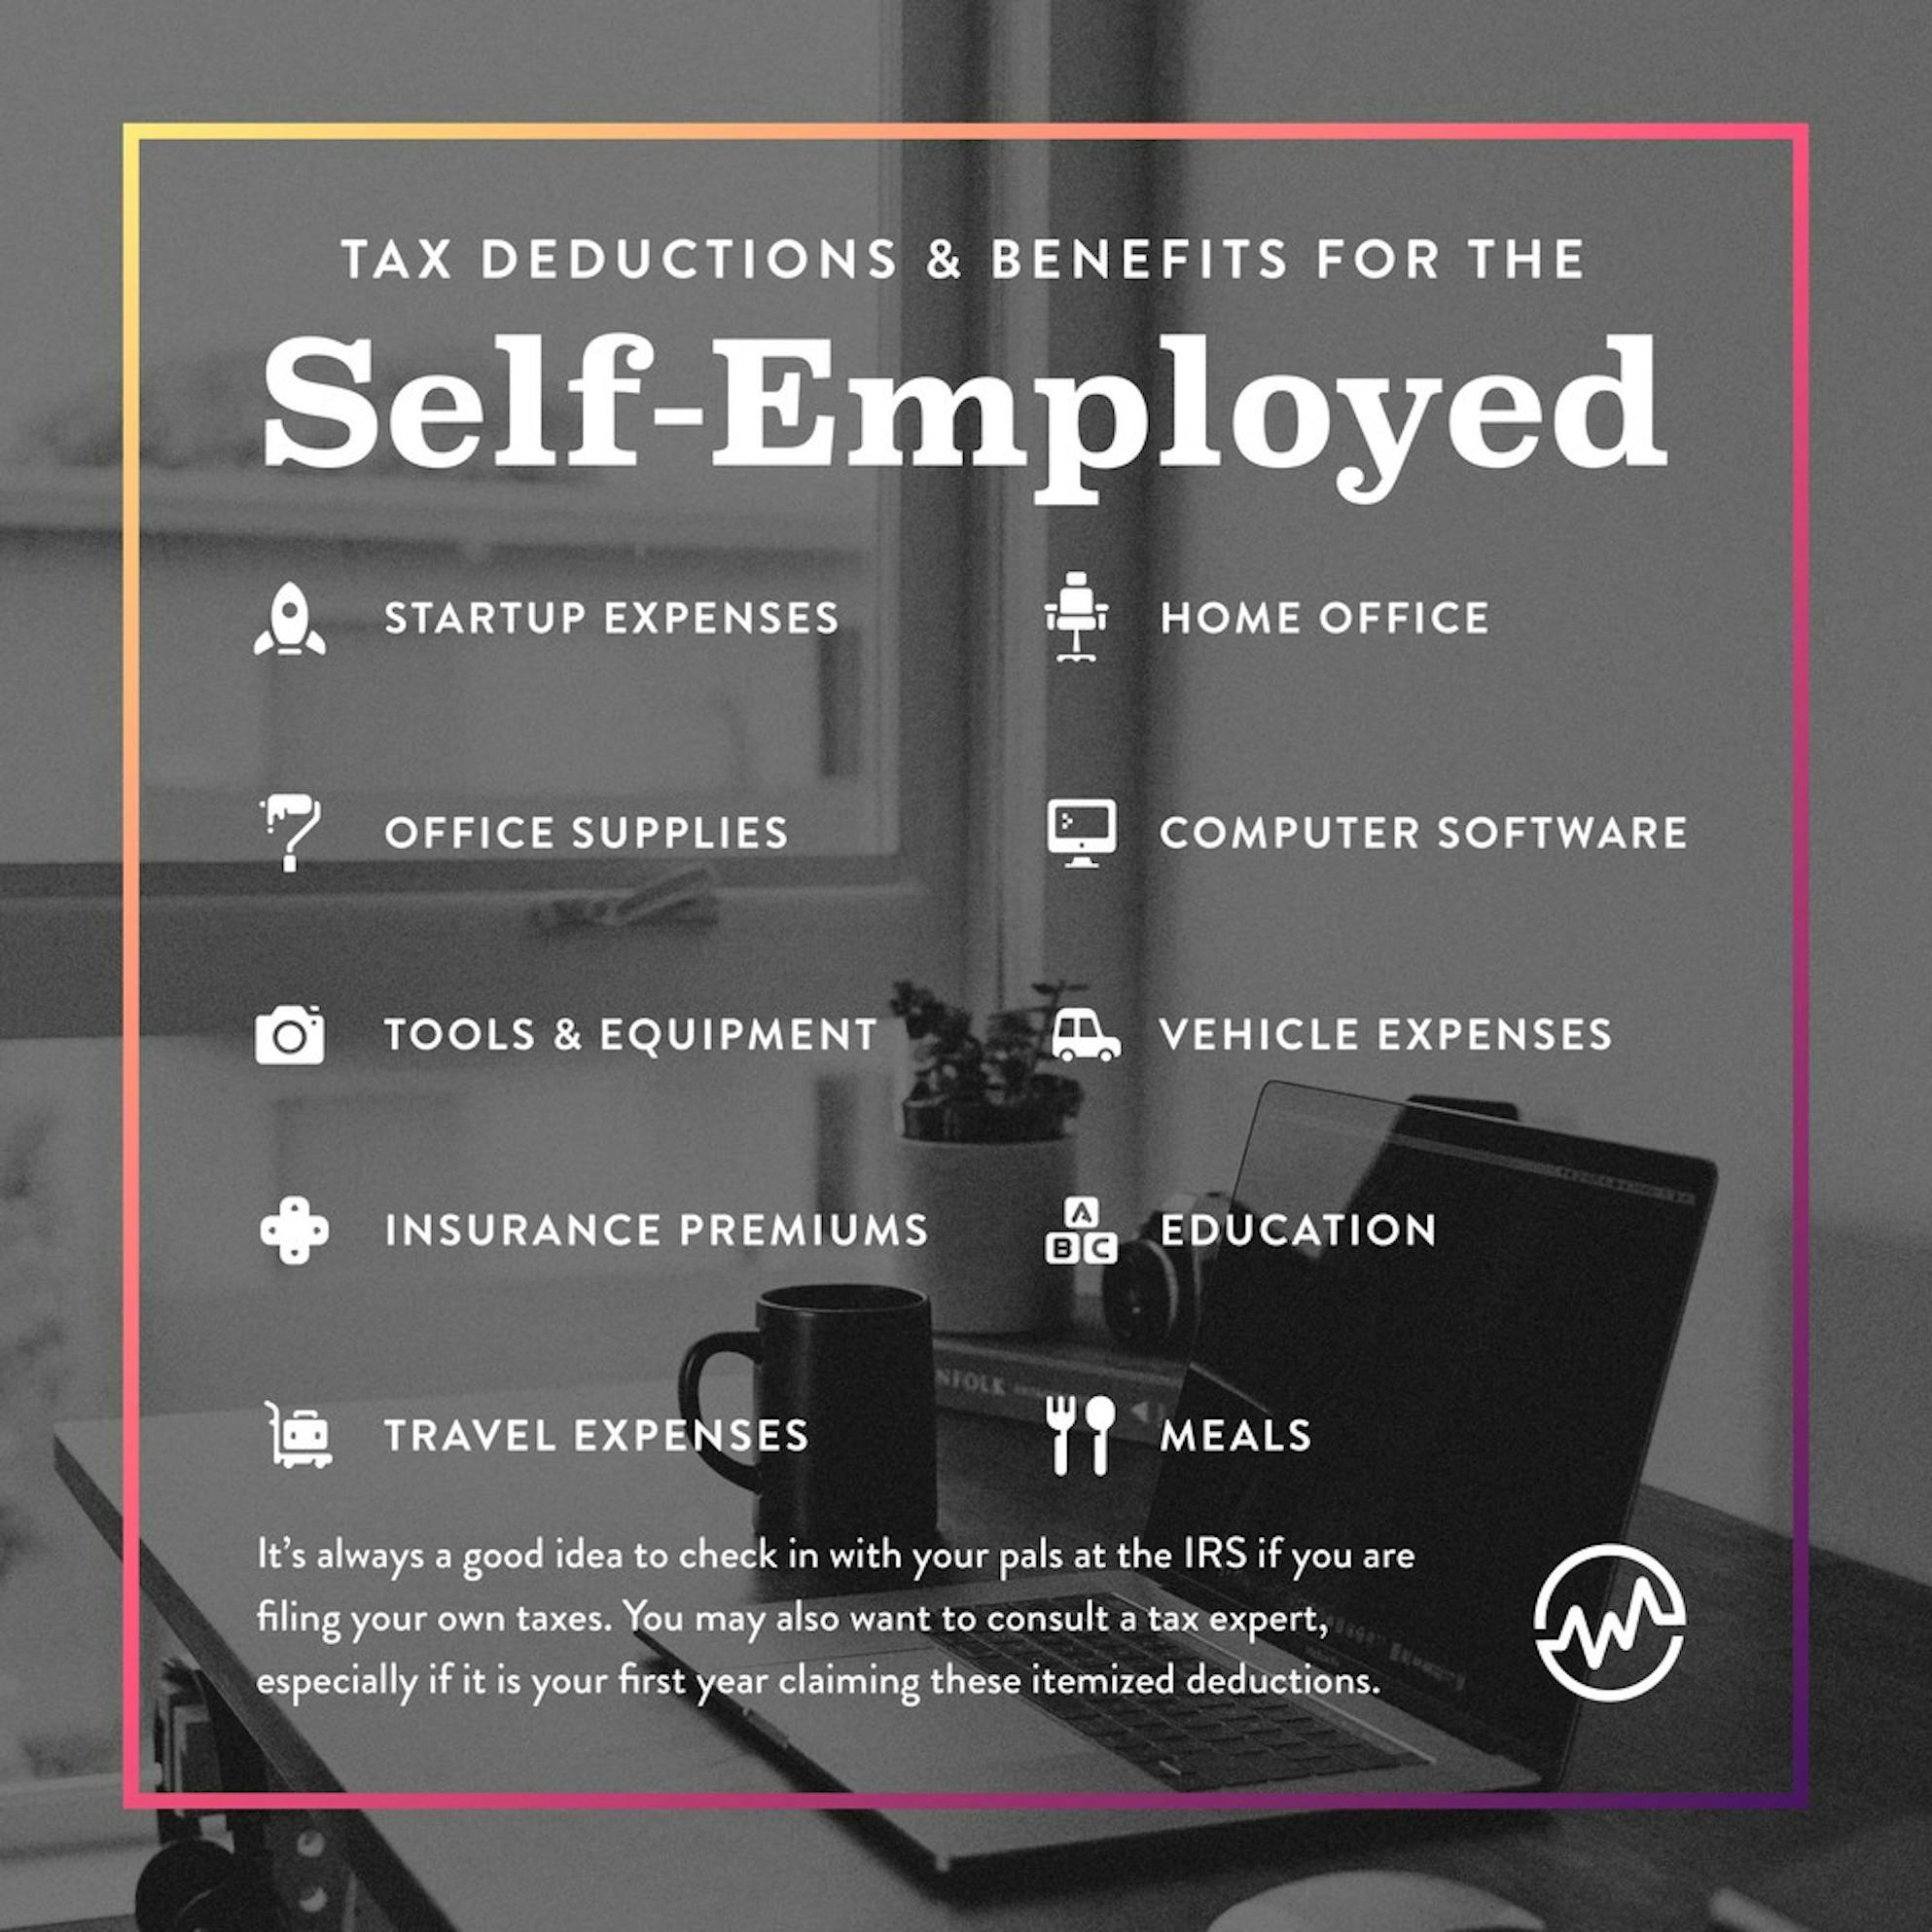 Top 10 Tax Deductions and Benefits for the Self-Employed